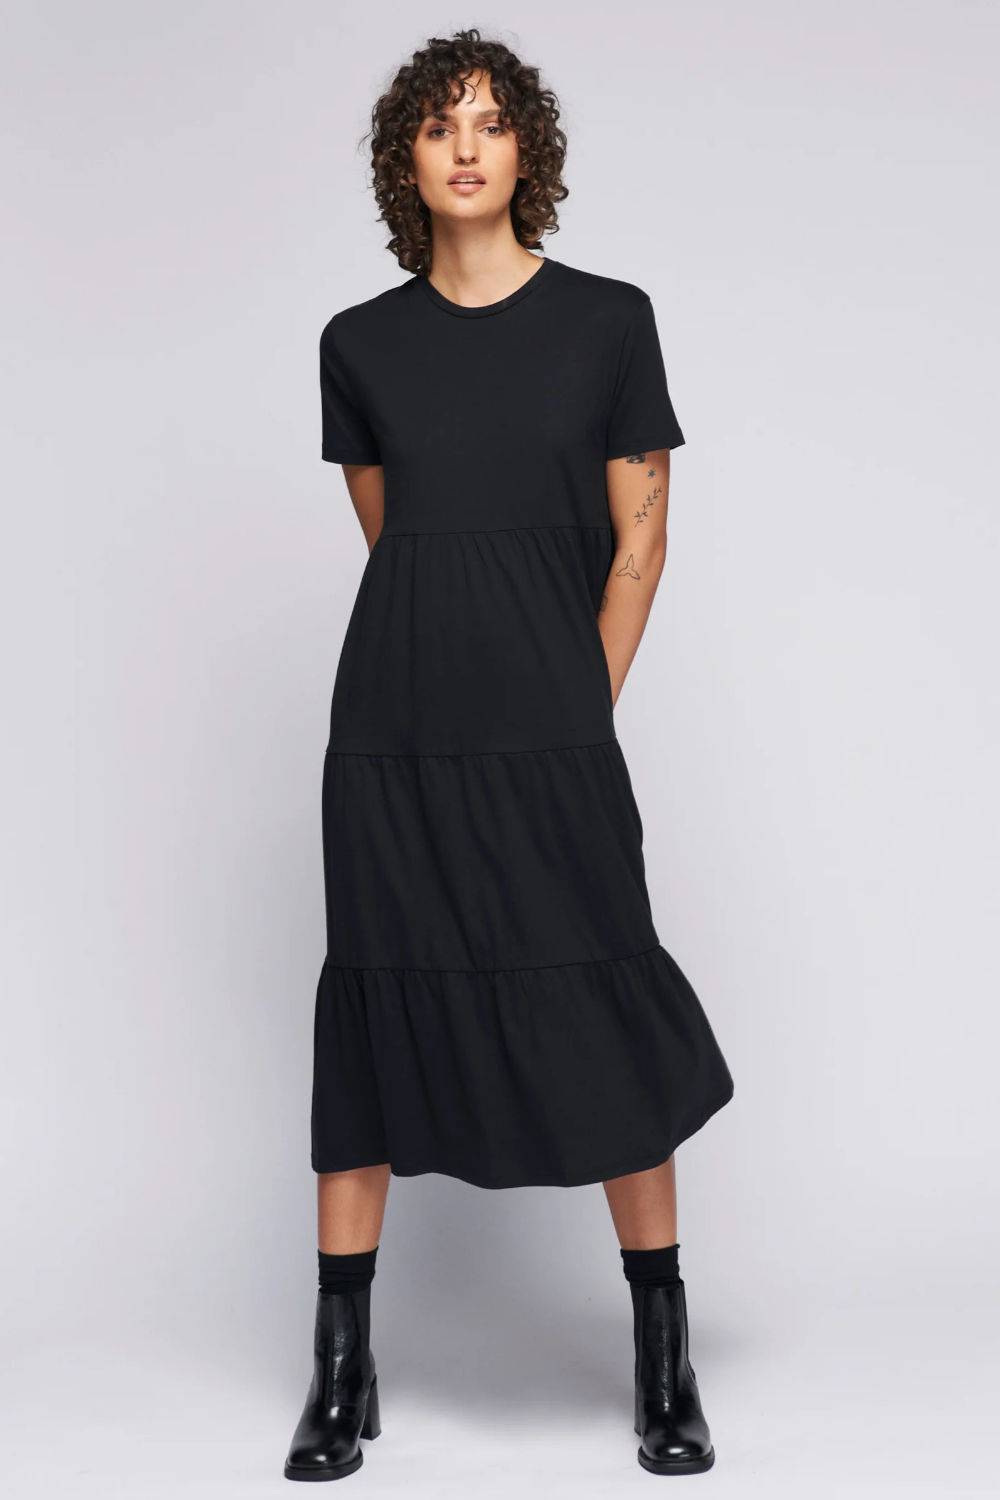 15 Best Minimalist And Chic Clothing Brands Like Arket | Panaprium